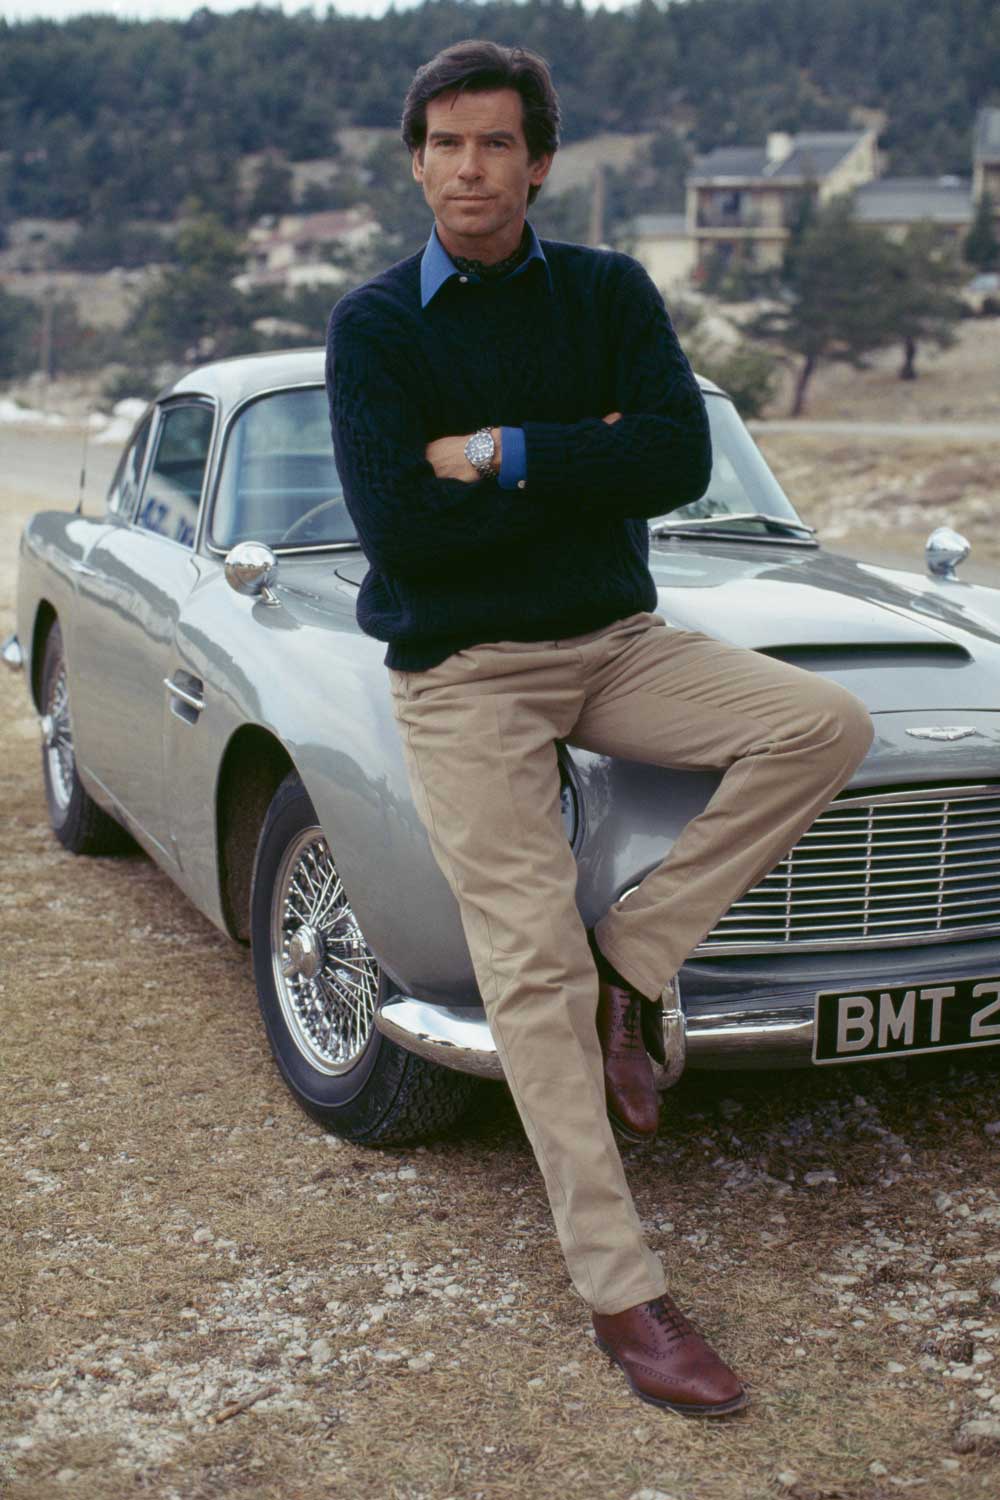 Classic elements of James Bond 007's equipment; the stunning Aston Martin DB5 and an OMEGA Seamaster Diver 300M on the wrist. Here, Pierce Brosnan during the shooting of Goldeneye, 1995.